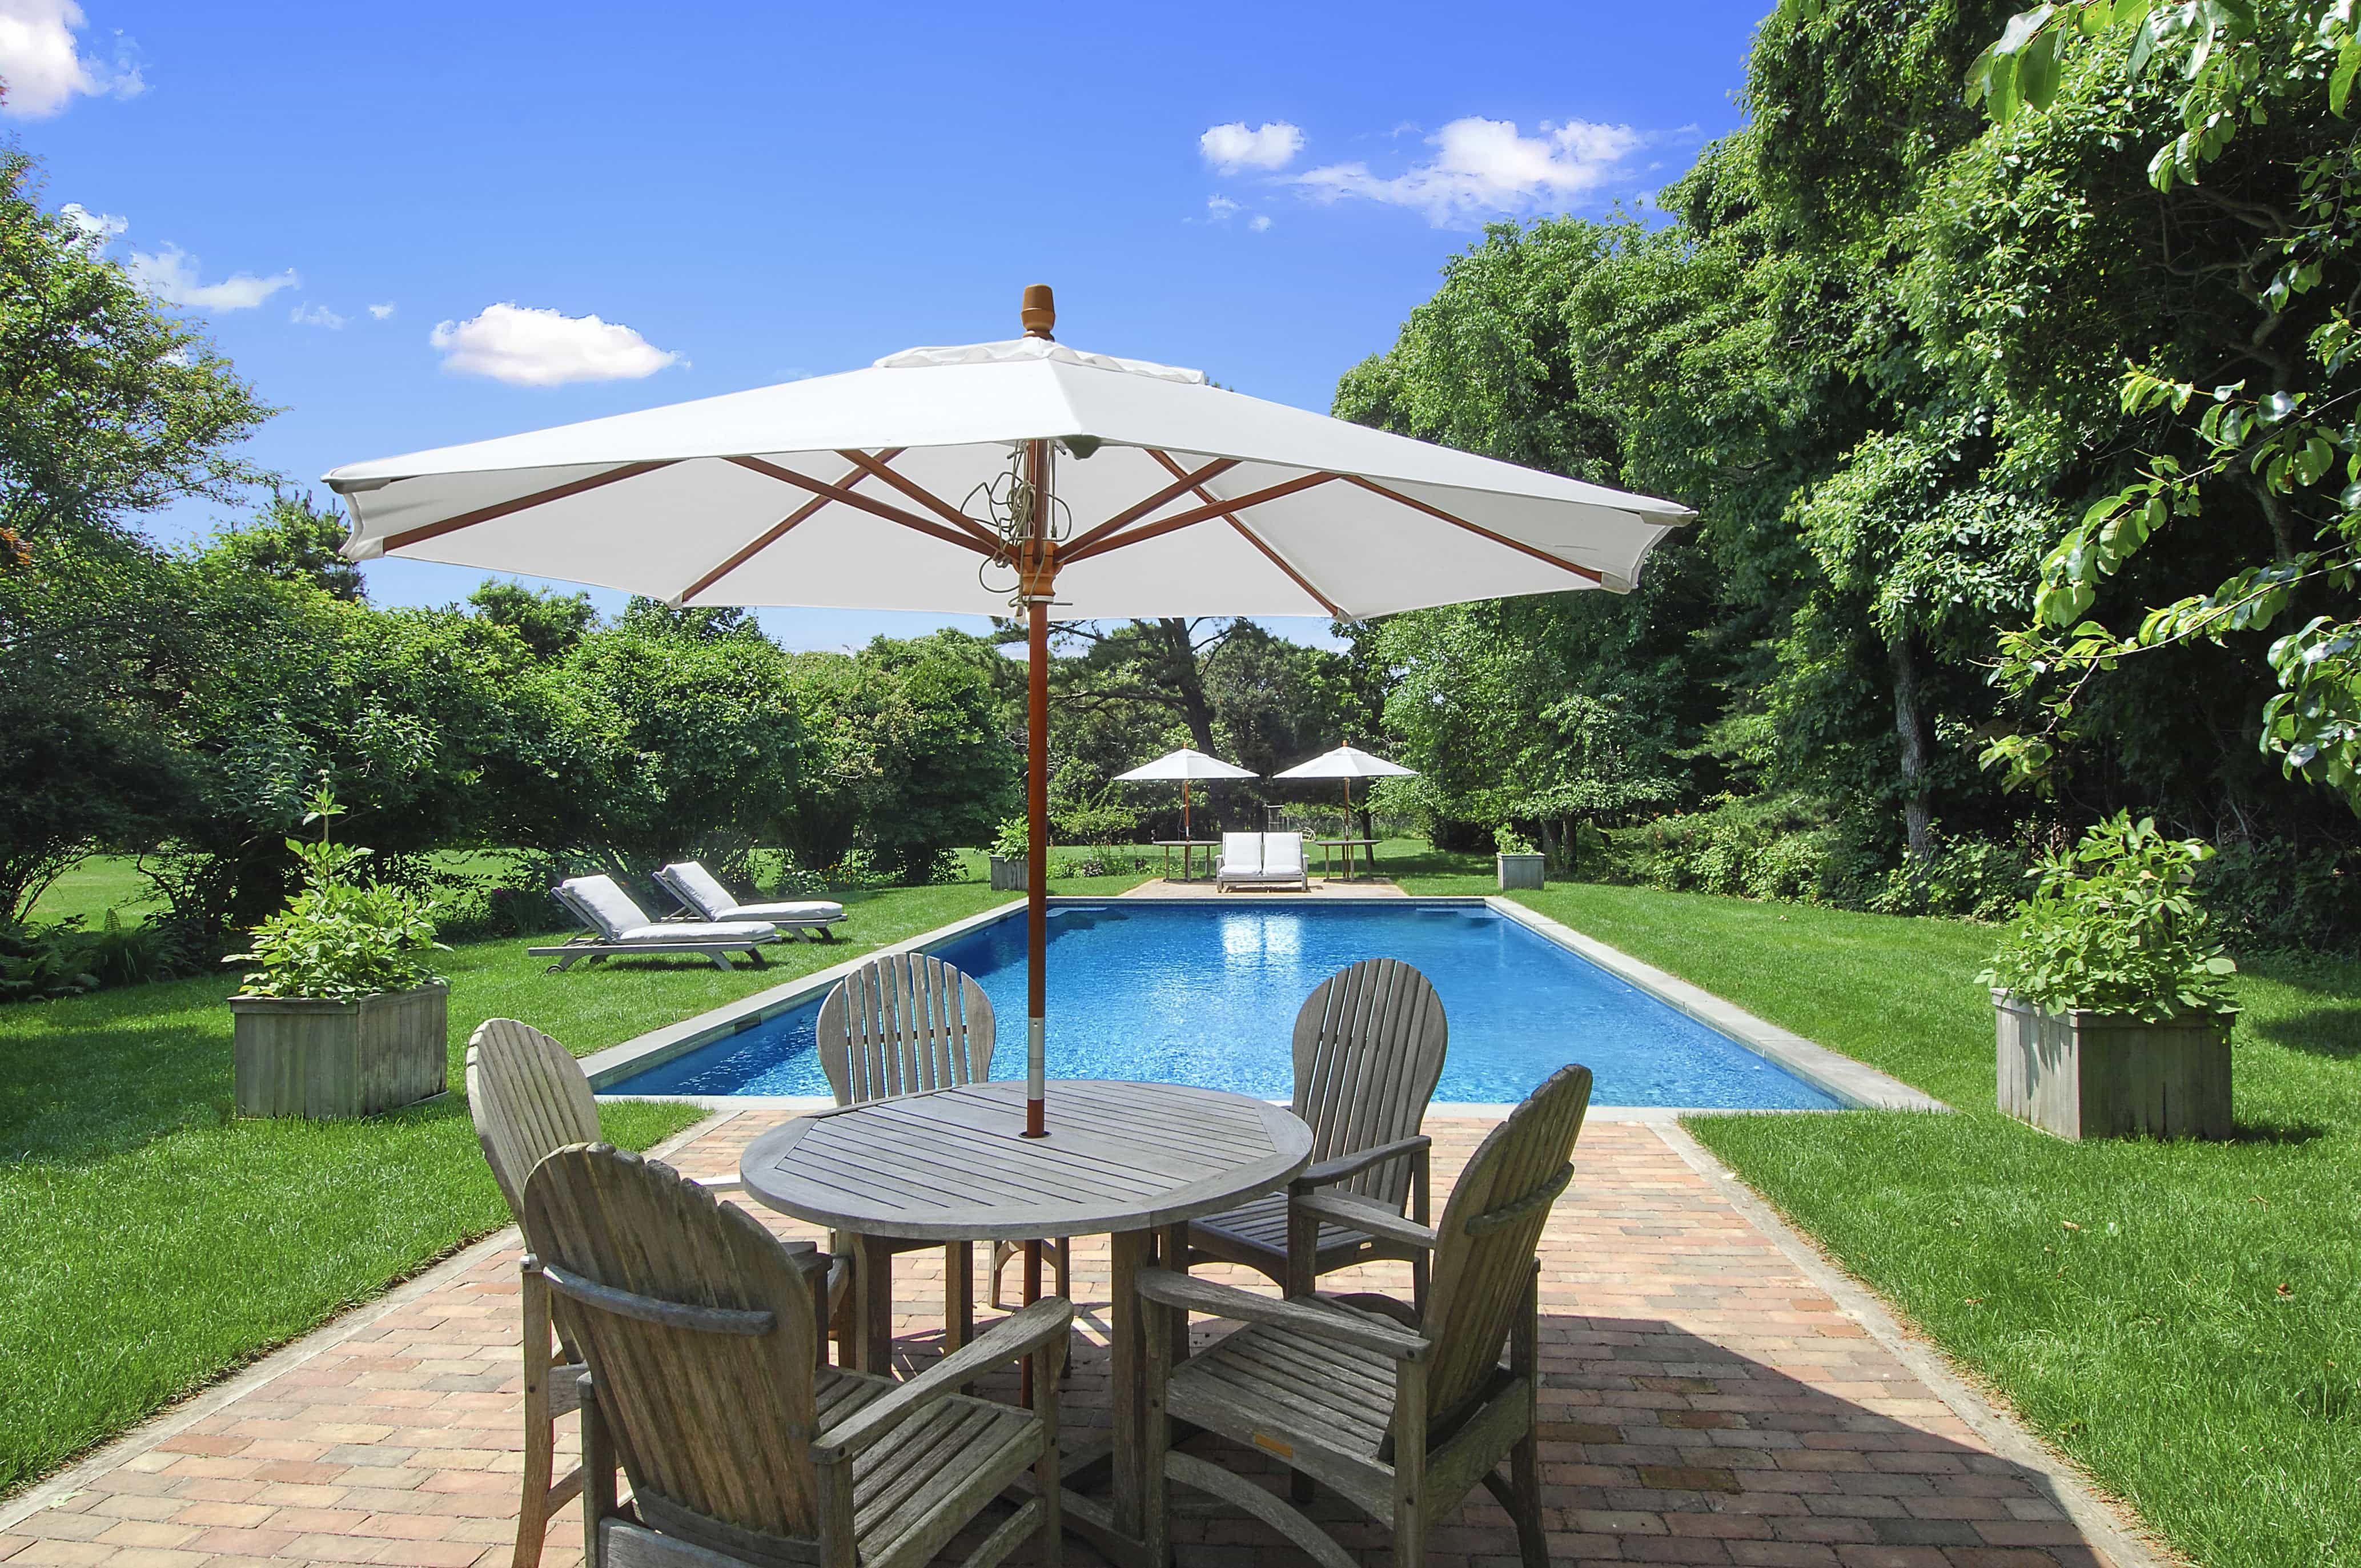 Sunny New York Swimming Pool With Brick Patio And Wooden Outdoor Furniture (Photo 3 of 25)